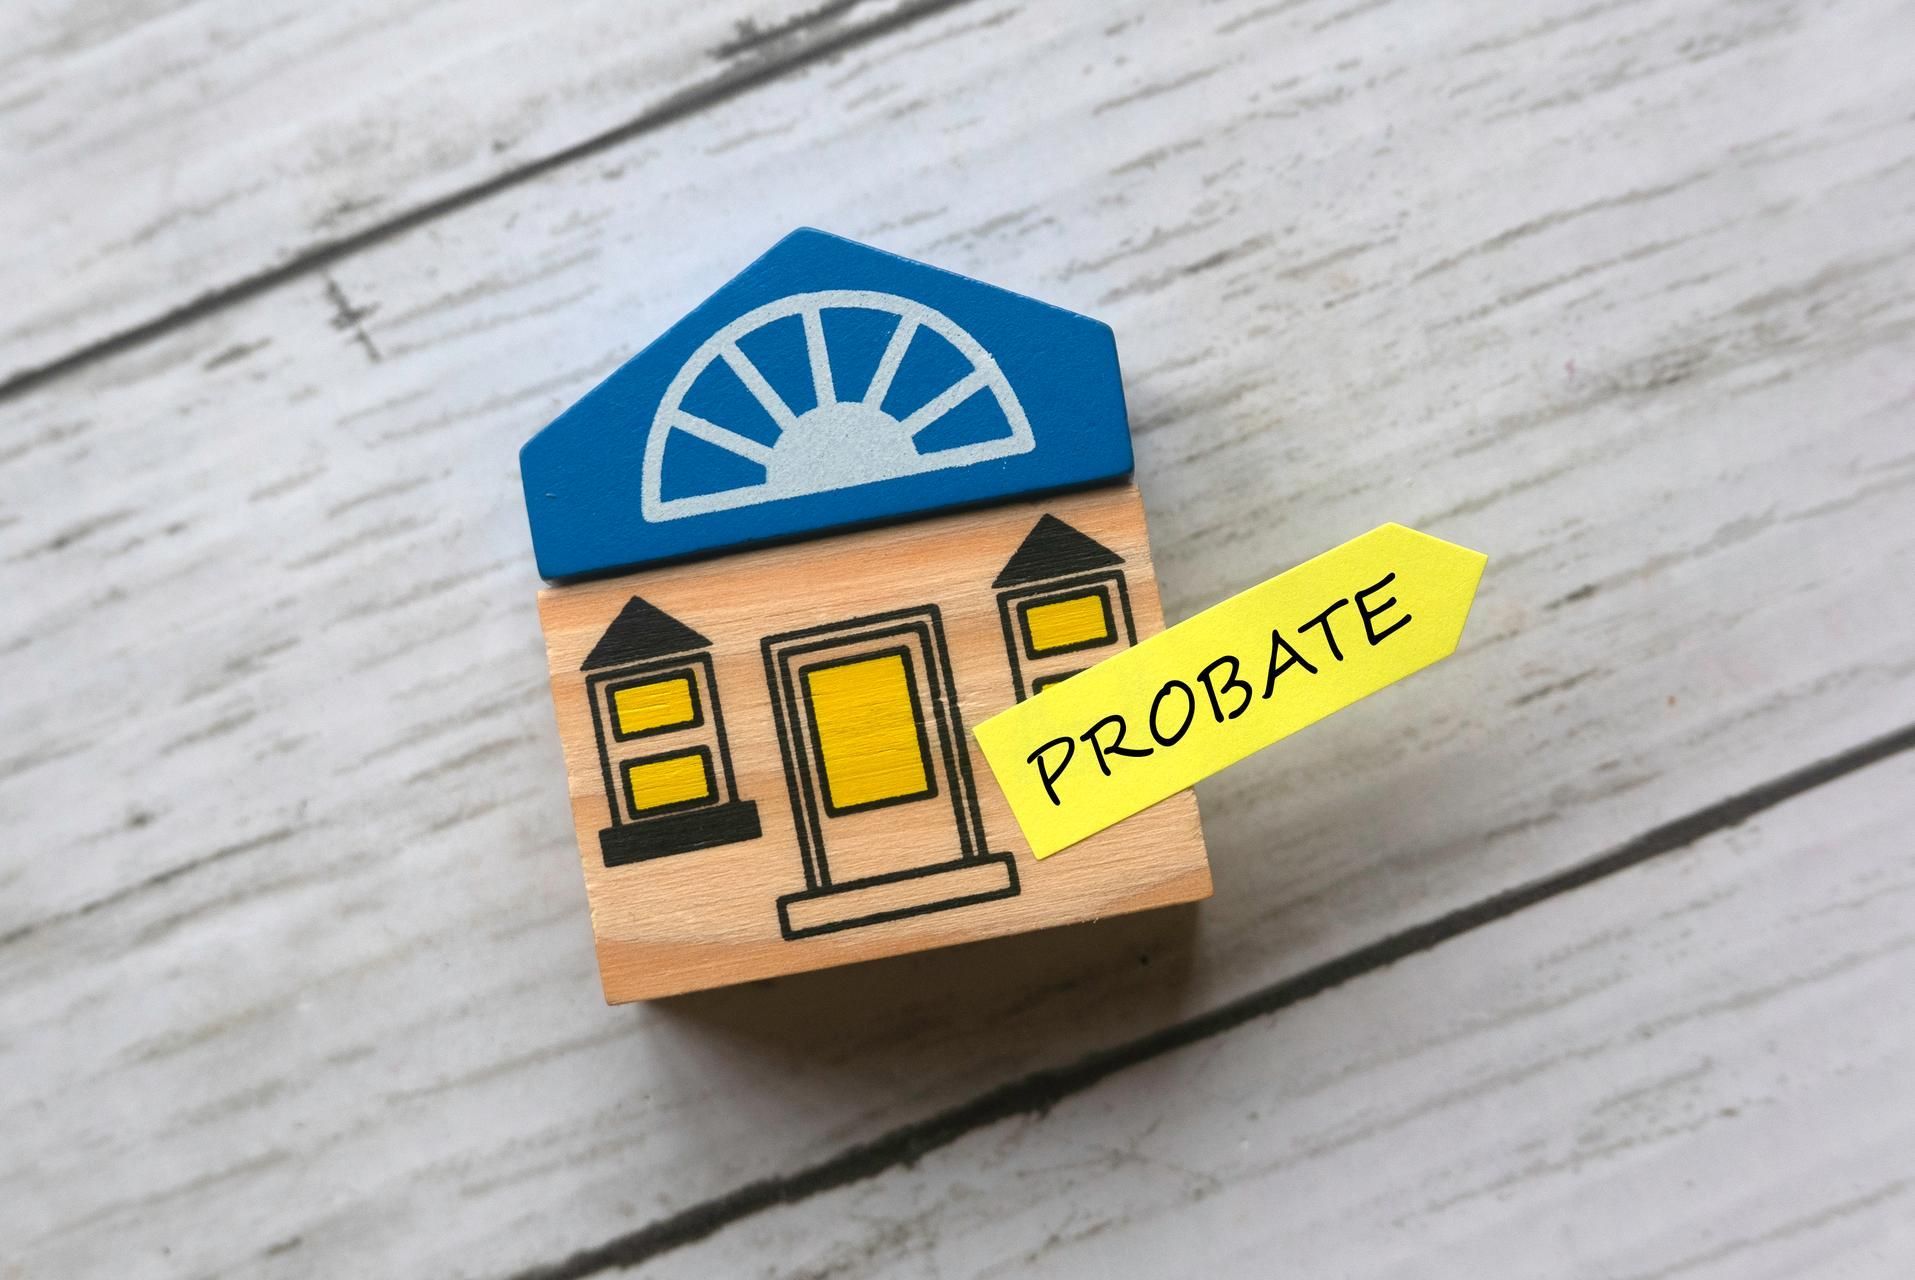 Probate administration in Florida